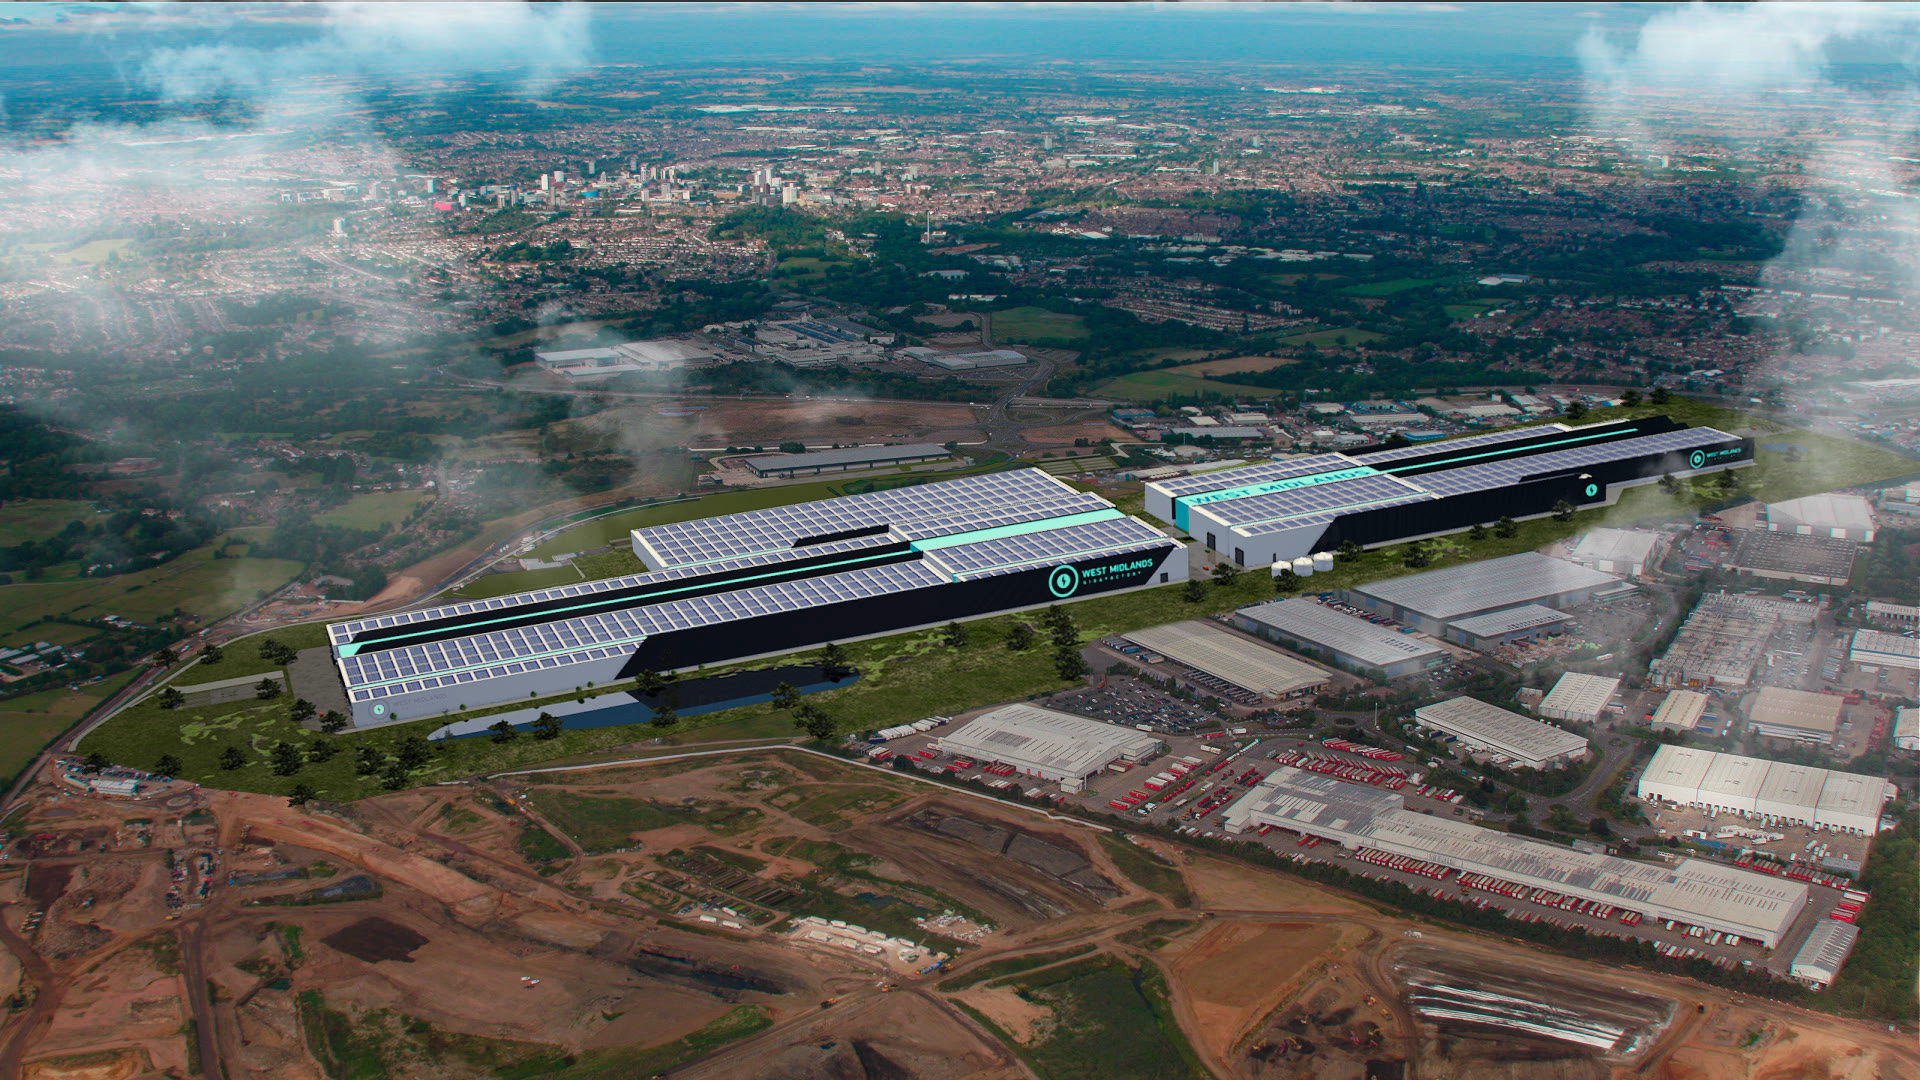 An artists impression of the West Midlands Gigafactory. An aerial view of long factory buildings with a panelled roof. The artist ha placed the factory in to a photograph of the current landscape.